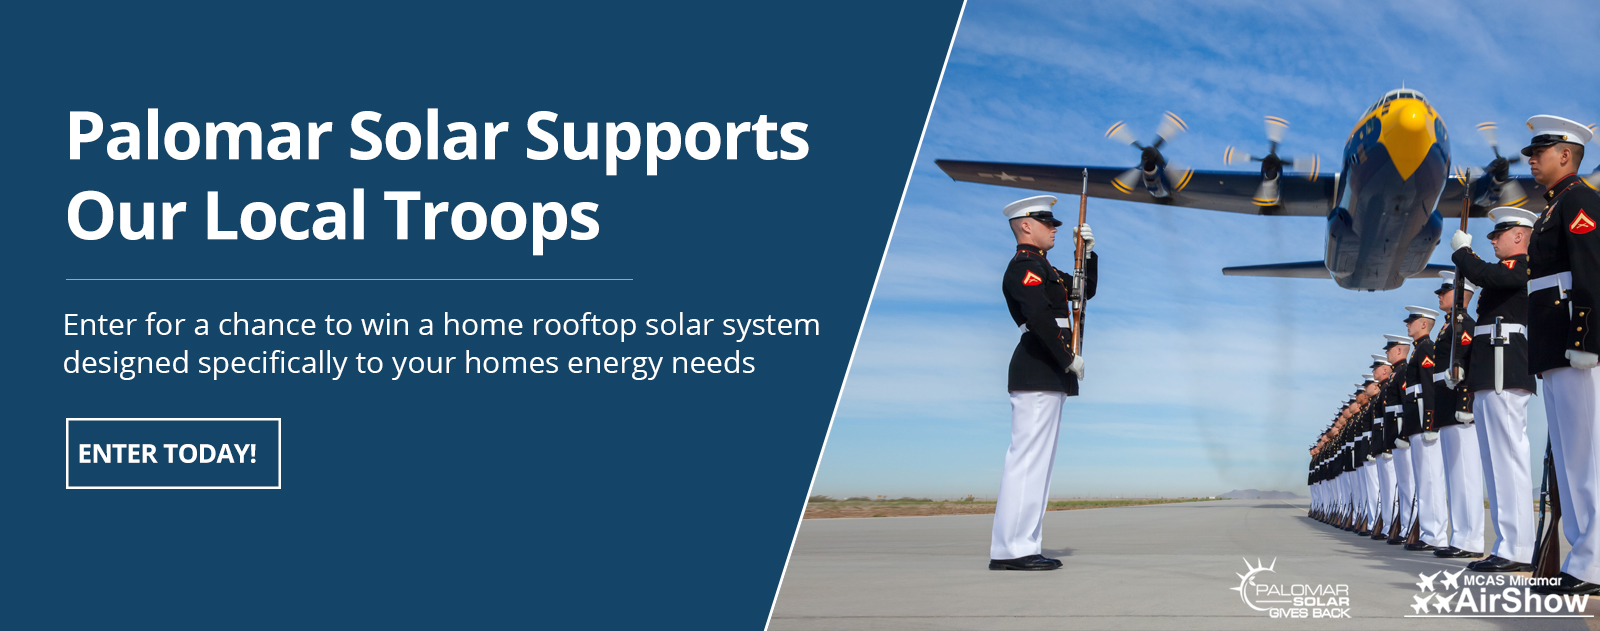 Palomar Solar and Roofing gives away a free home rooftop solar system